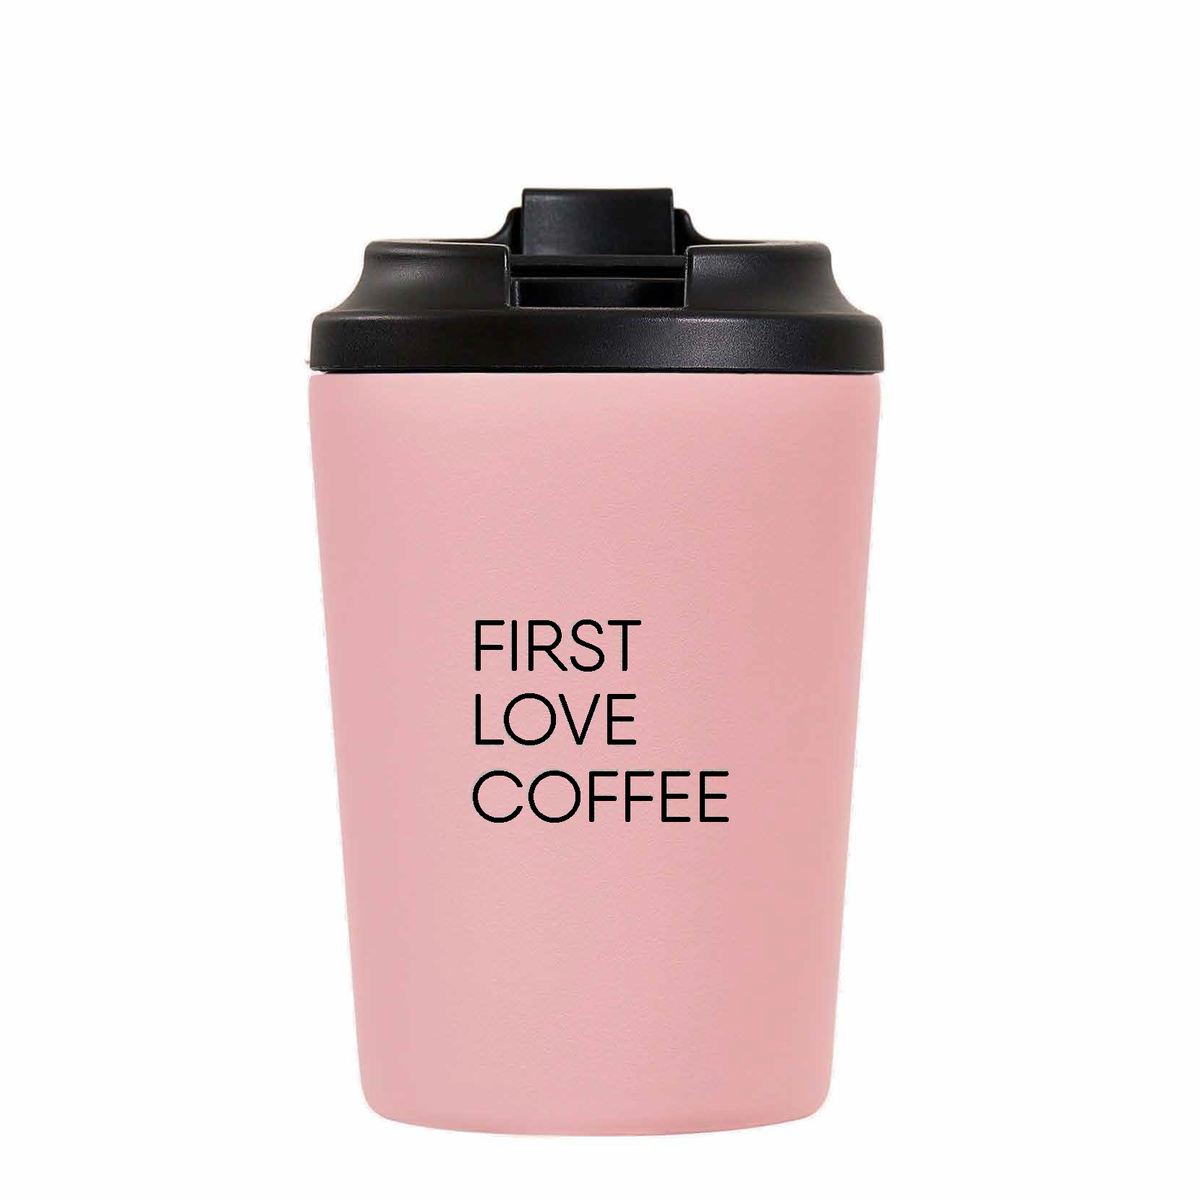 Fressko Reusable Cup First Love Coffee First Love Coffee